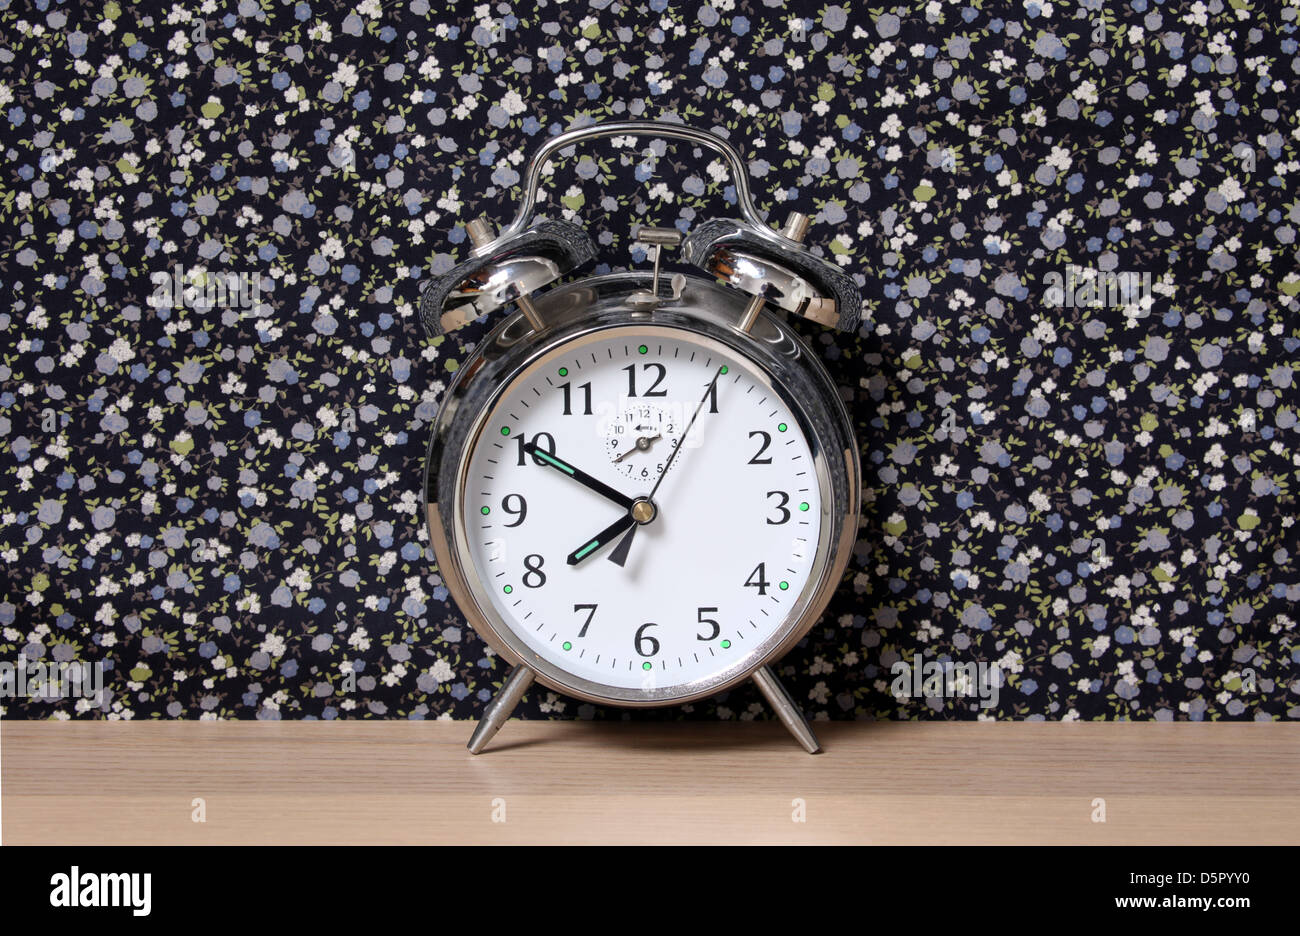 Old style alarm clock, on a dresser in front of floral wallpaper. Time set at 7.50. Stock Photo